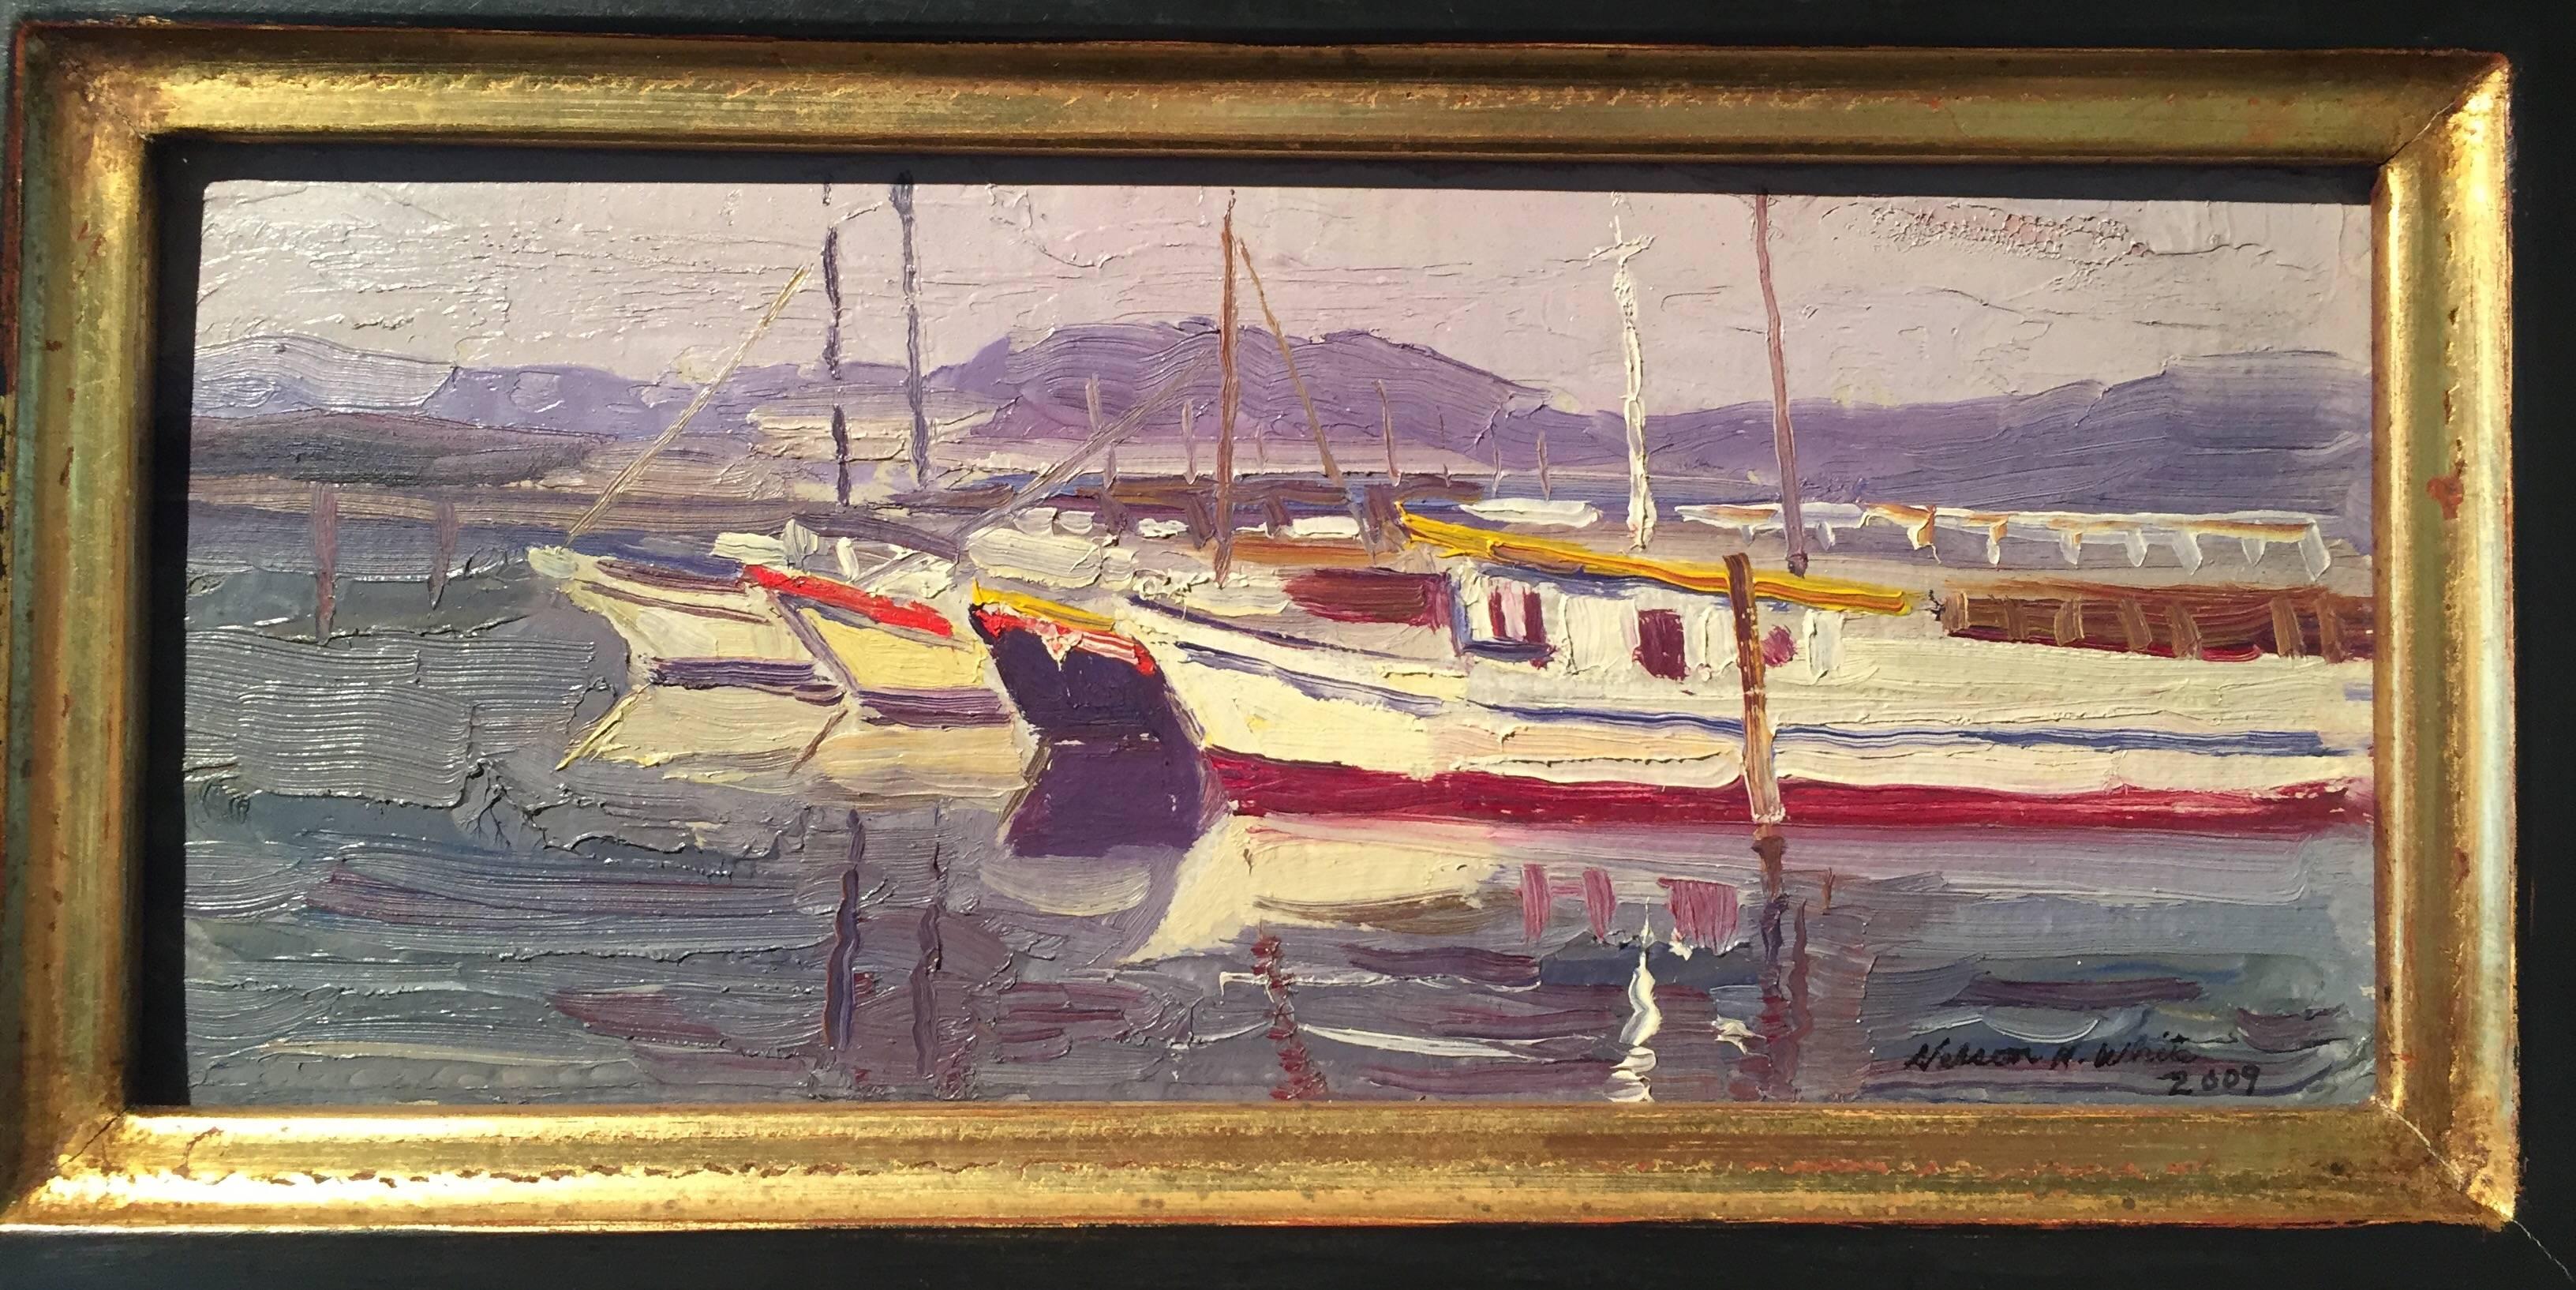 Fishermans Wharf, San Francisco - Painting by Nelson H. White